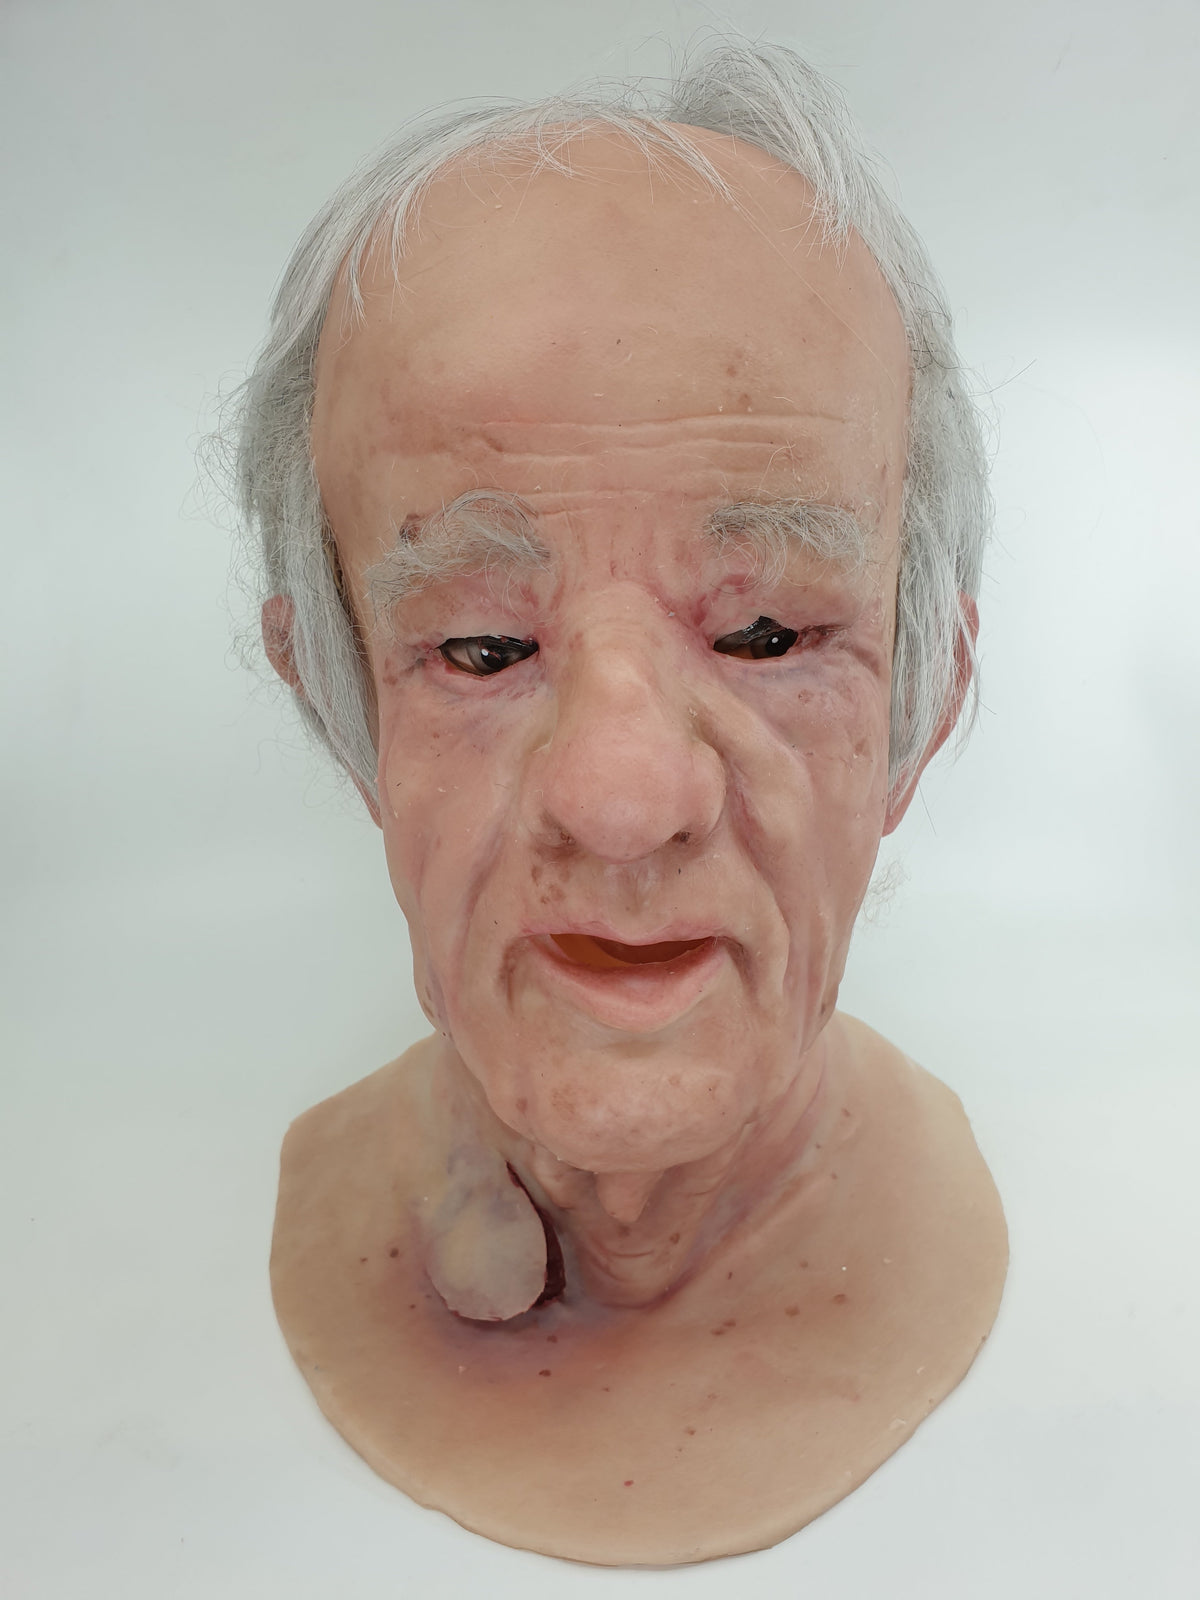 MSURG316 Amos With Neck Wound - SimMan Facial Overlay